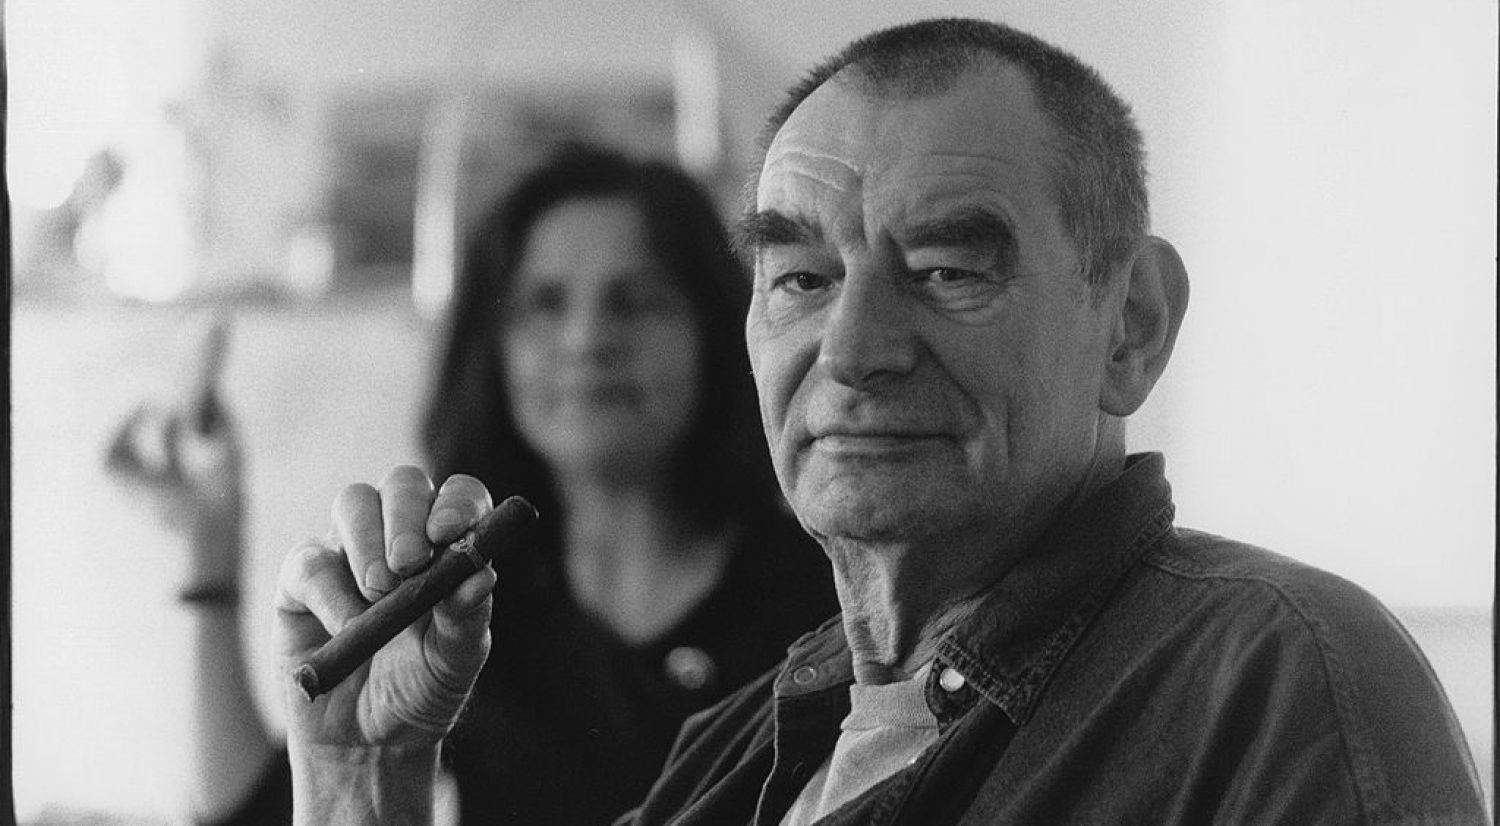 Artist Otto Muehl and his wife. MAK. Vienna. Photograph. 1998 Photo: Imagno/Getty Images.